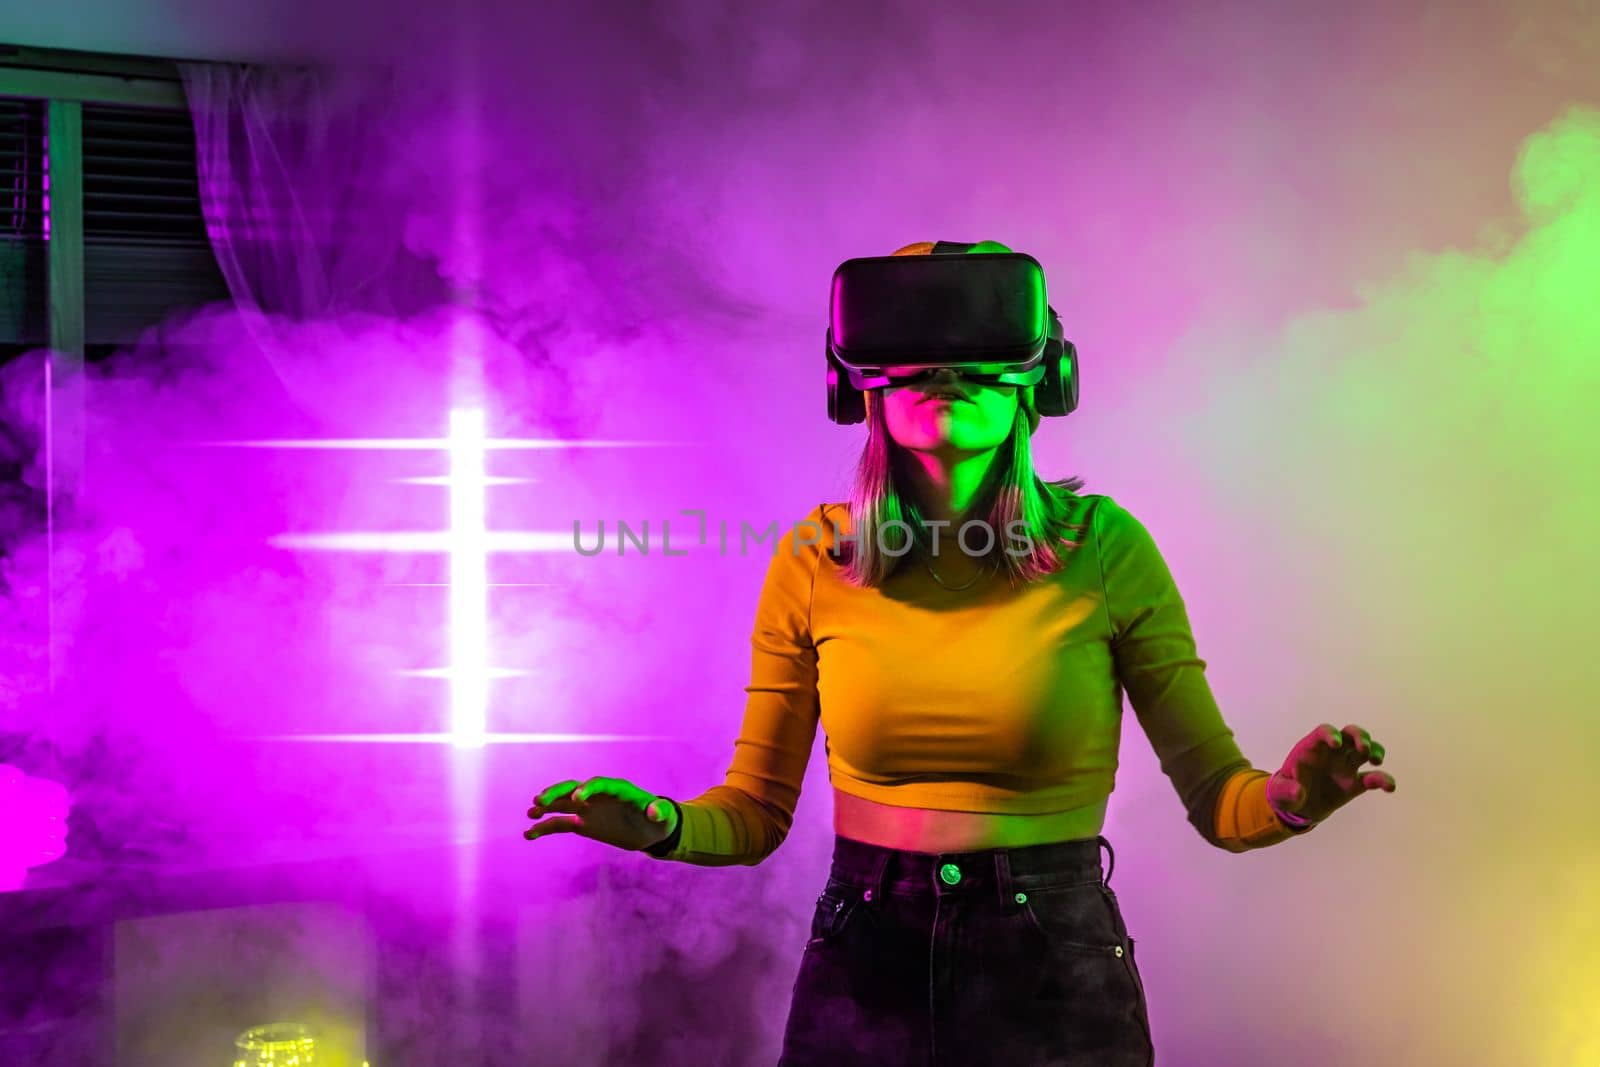 Wireless technologies. Young woman using virtual reality glasses in the room with neon lighting by PaulCarr